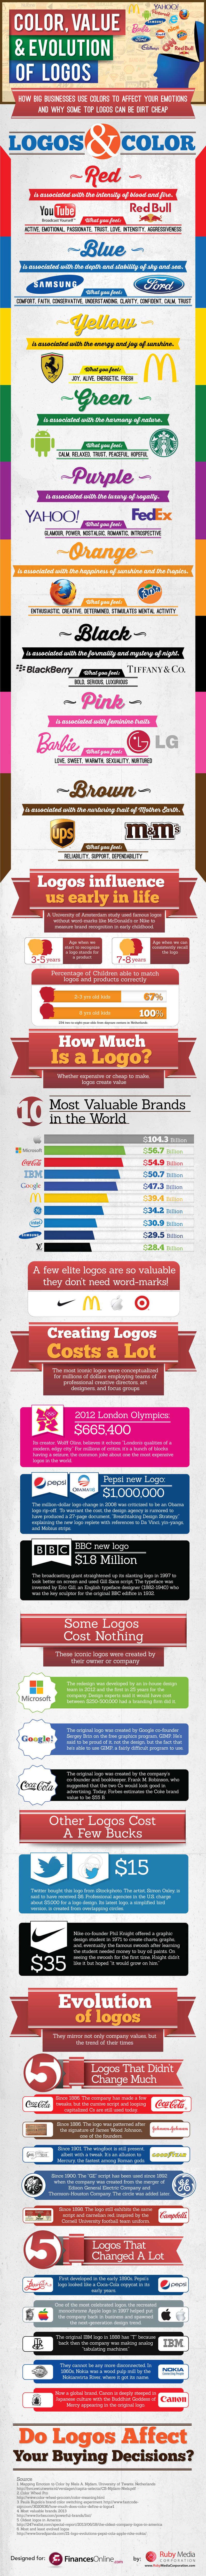 infographic-logo-color